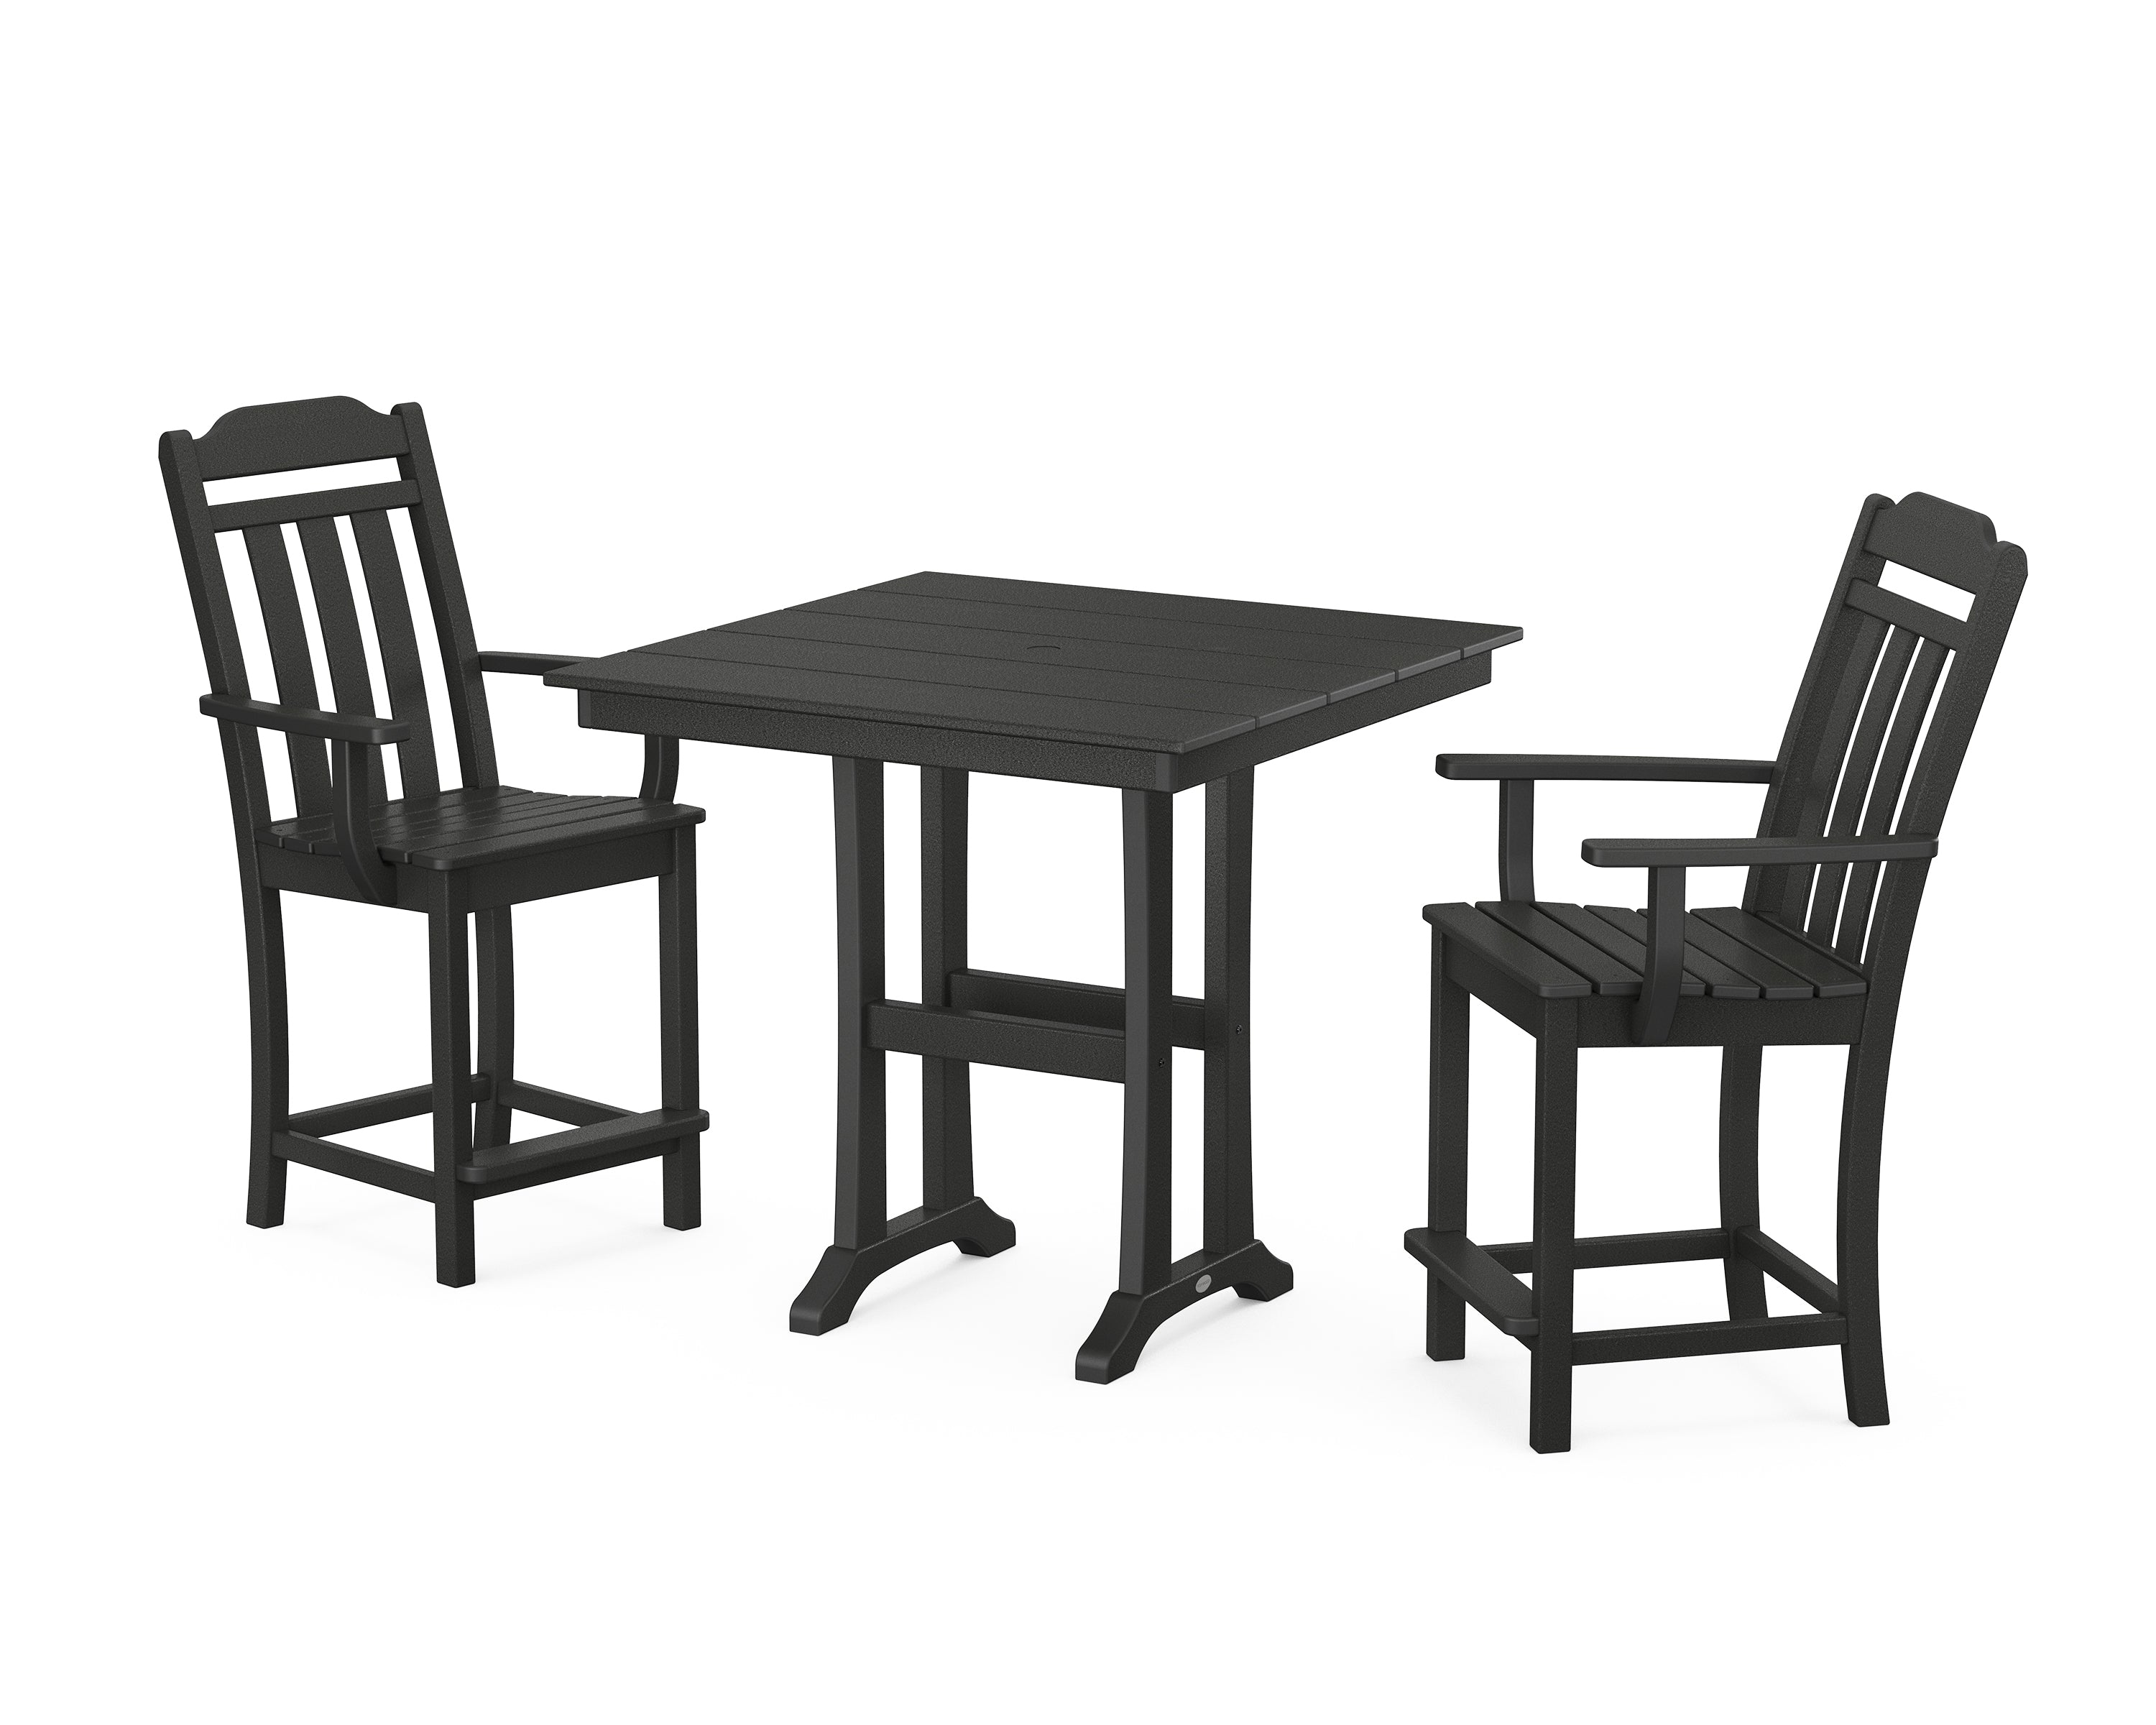 POLYWOOD Country Living 3-Piece Farmhouse Counter Set with Trestle Legs in Black